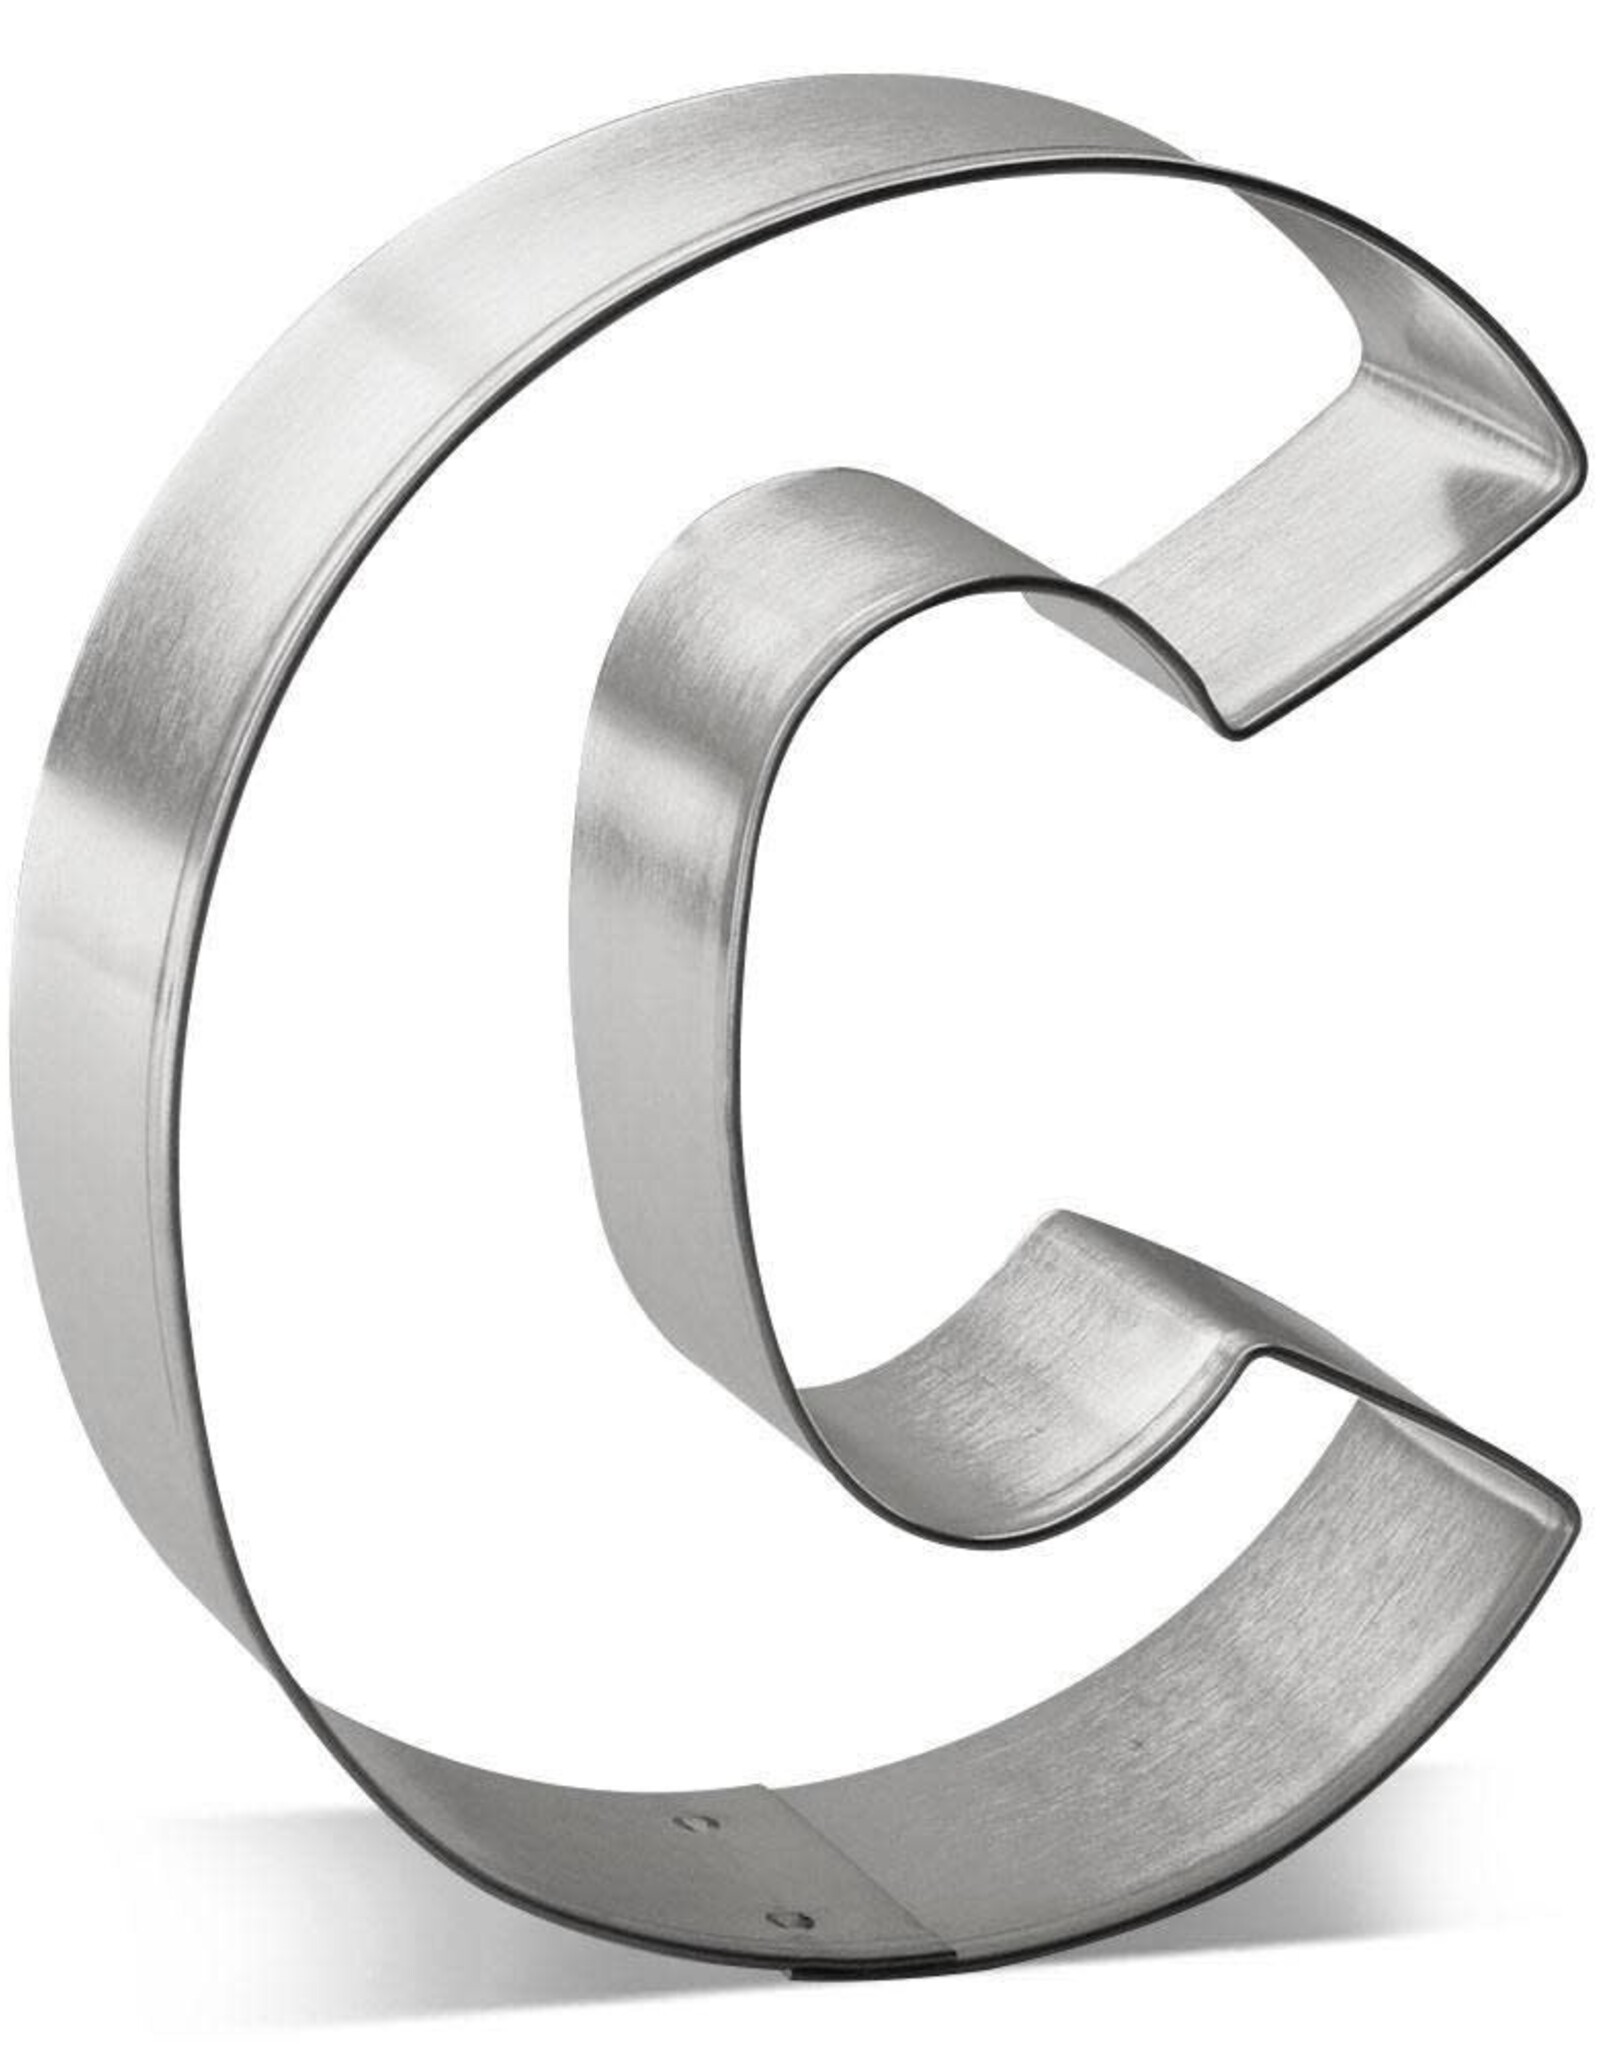 Letter "C" Cookie Cutter (3-3/8")